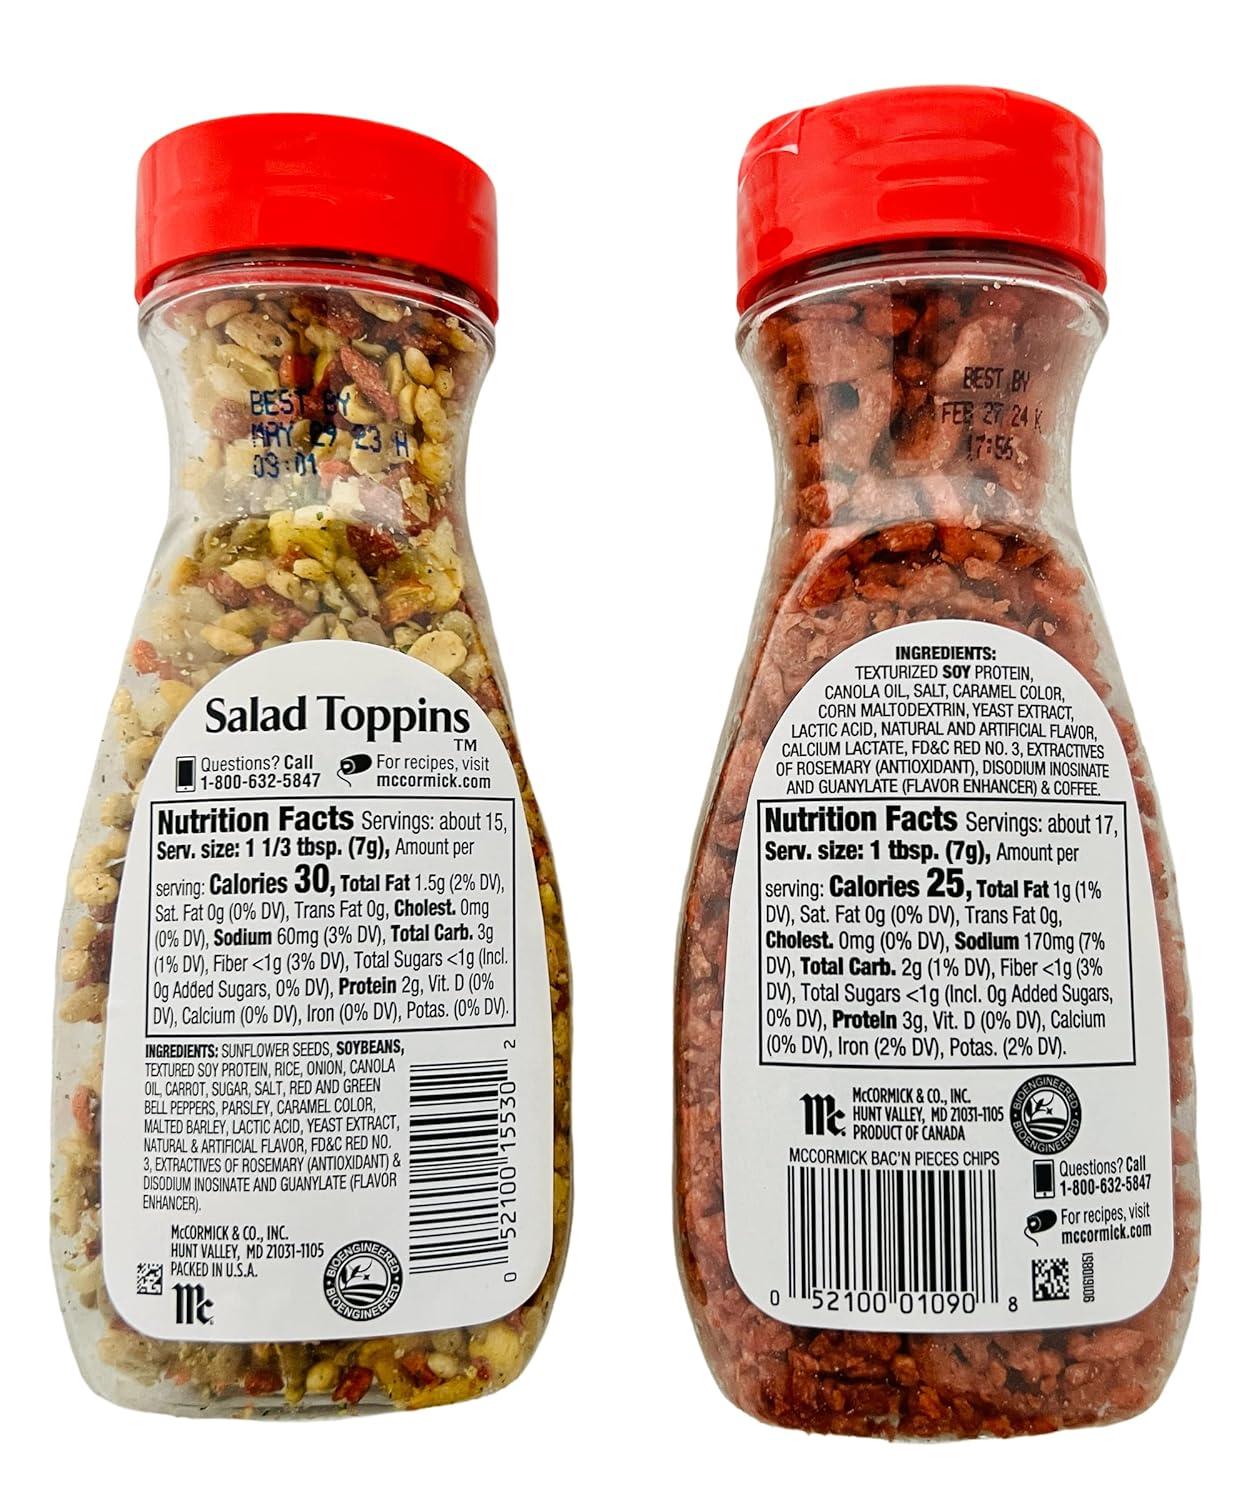 McCormick Crunchy & Flavorful Salad Toppings, 3.75 oz Salad Toppings 